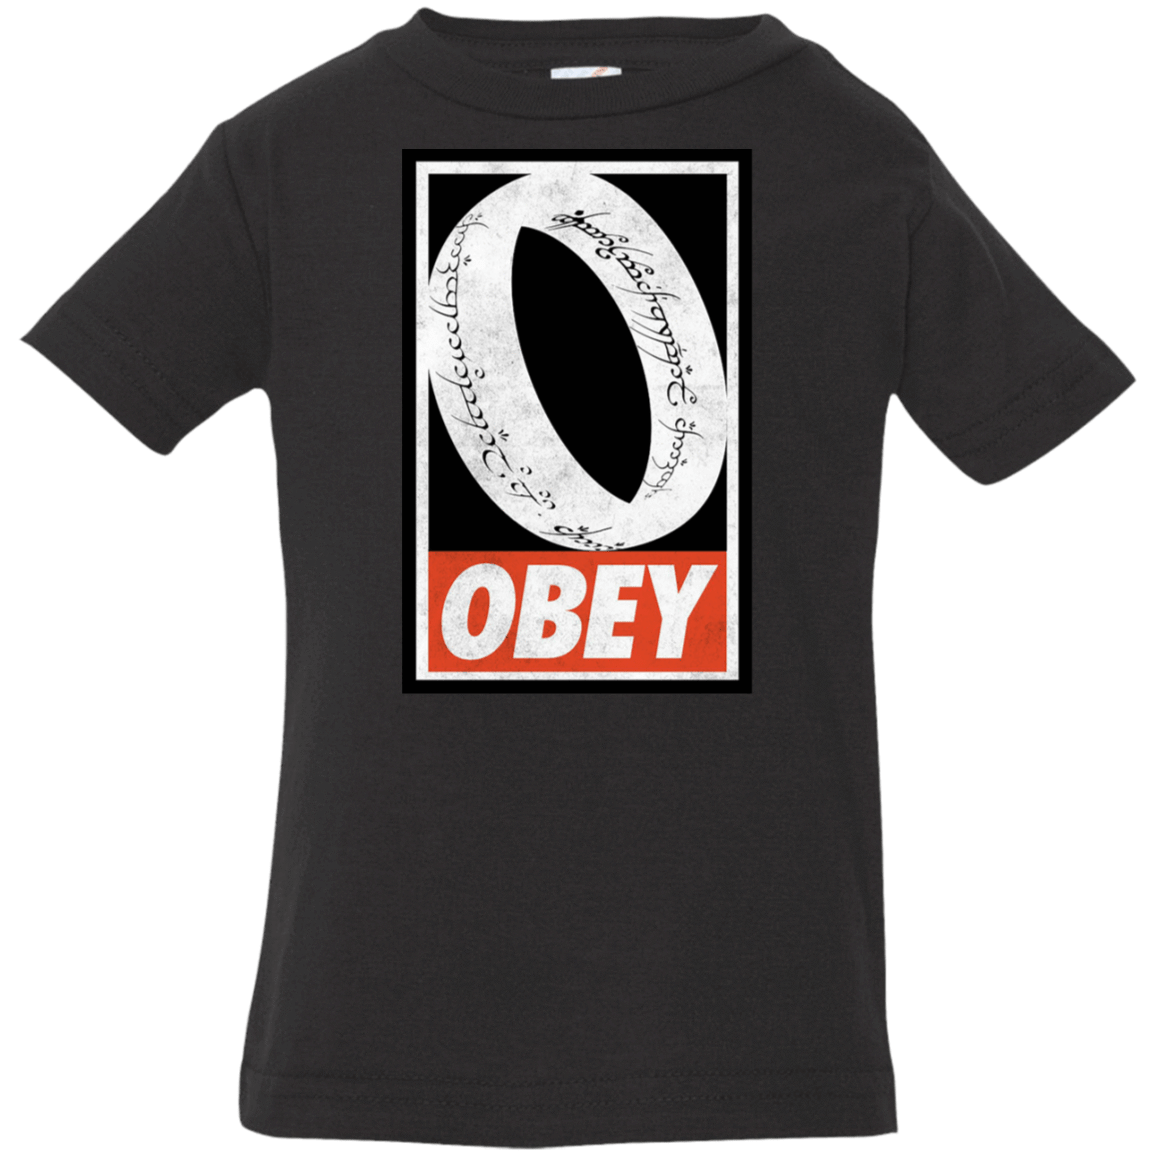 T-Shirts Black / 6 Months Obey One Ring Infant Premium T-Shirt